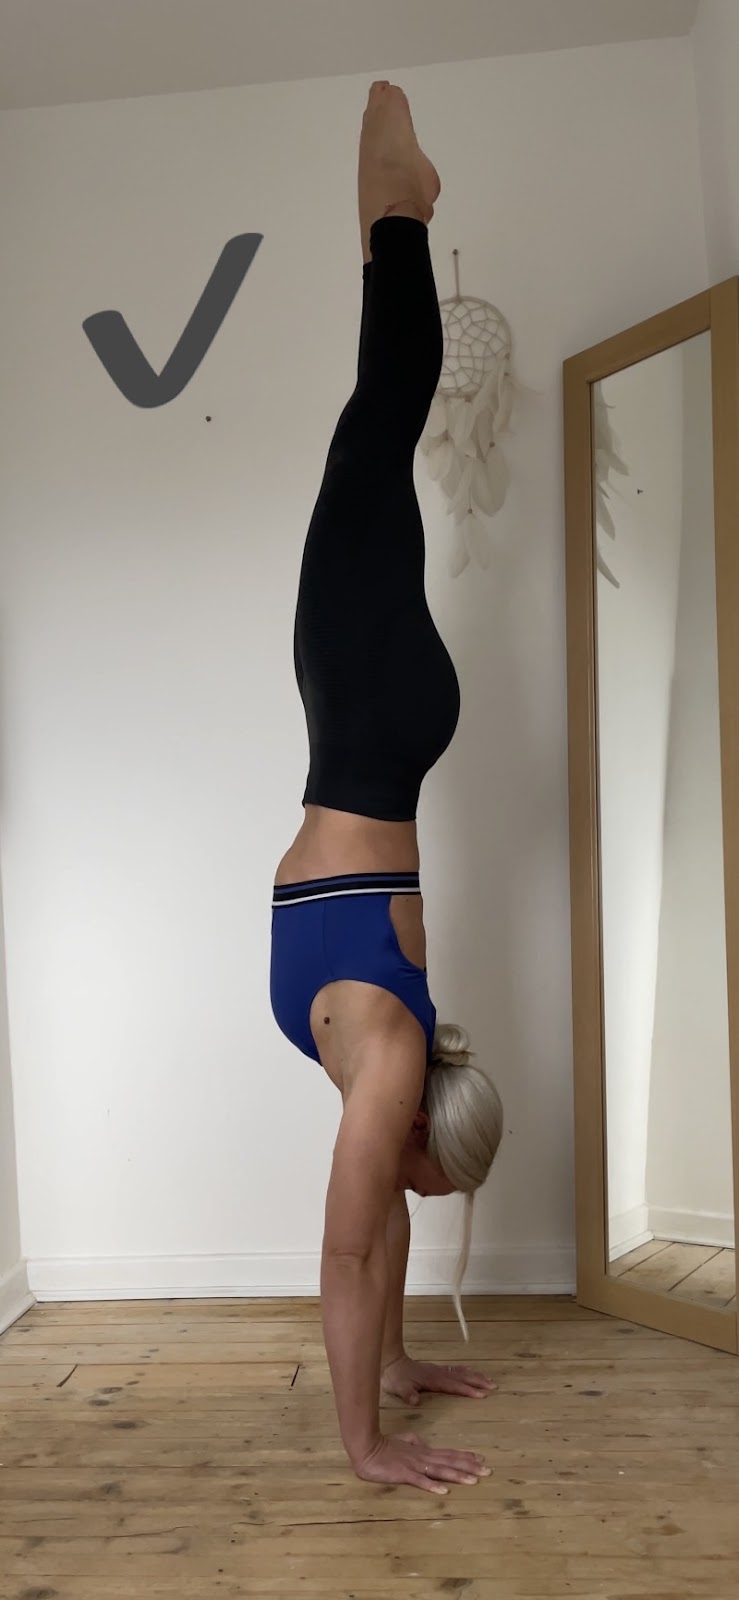 5 Tips To Help Your Handstand (From An Ex-Artistic Gymnast) - Move Dance